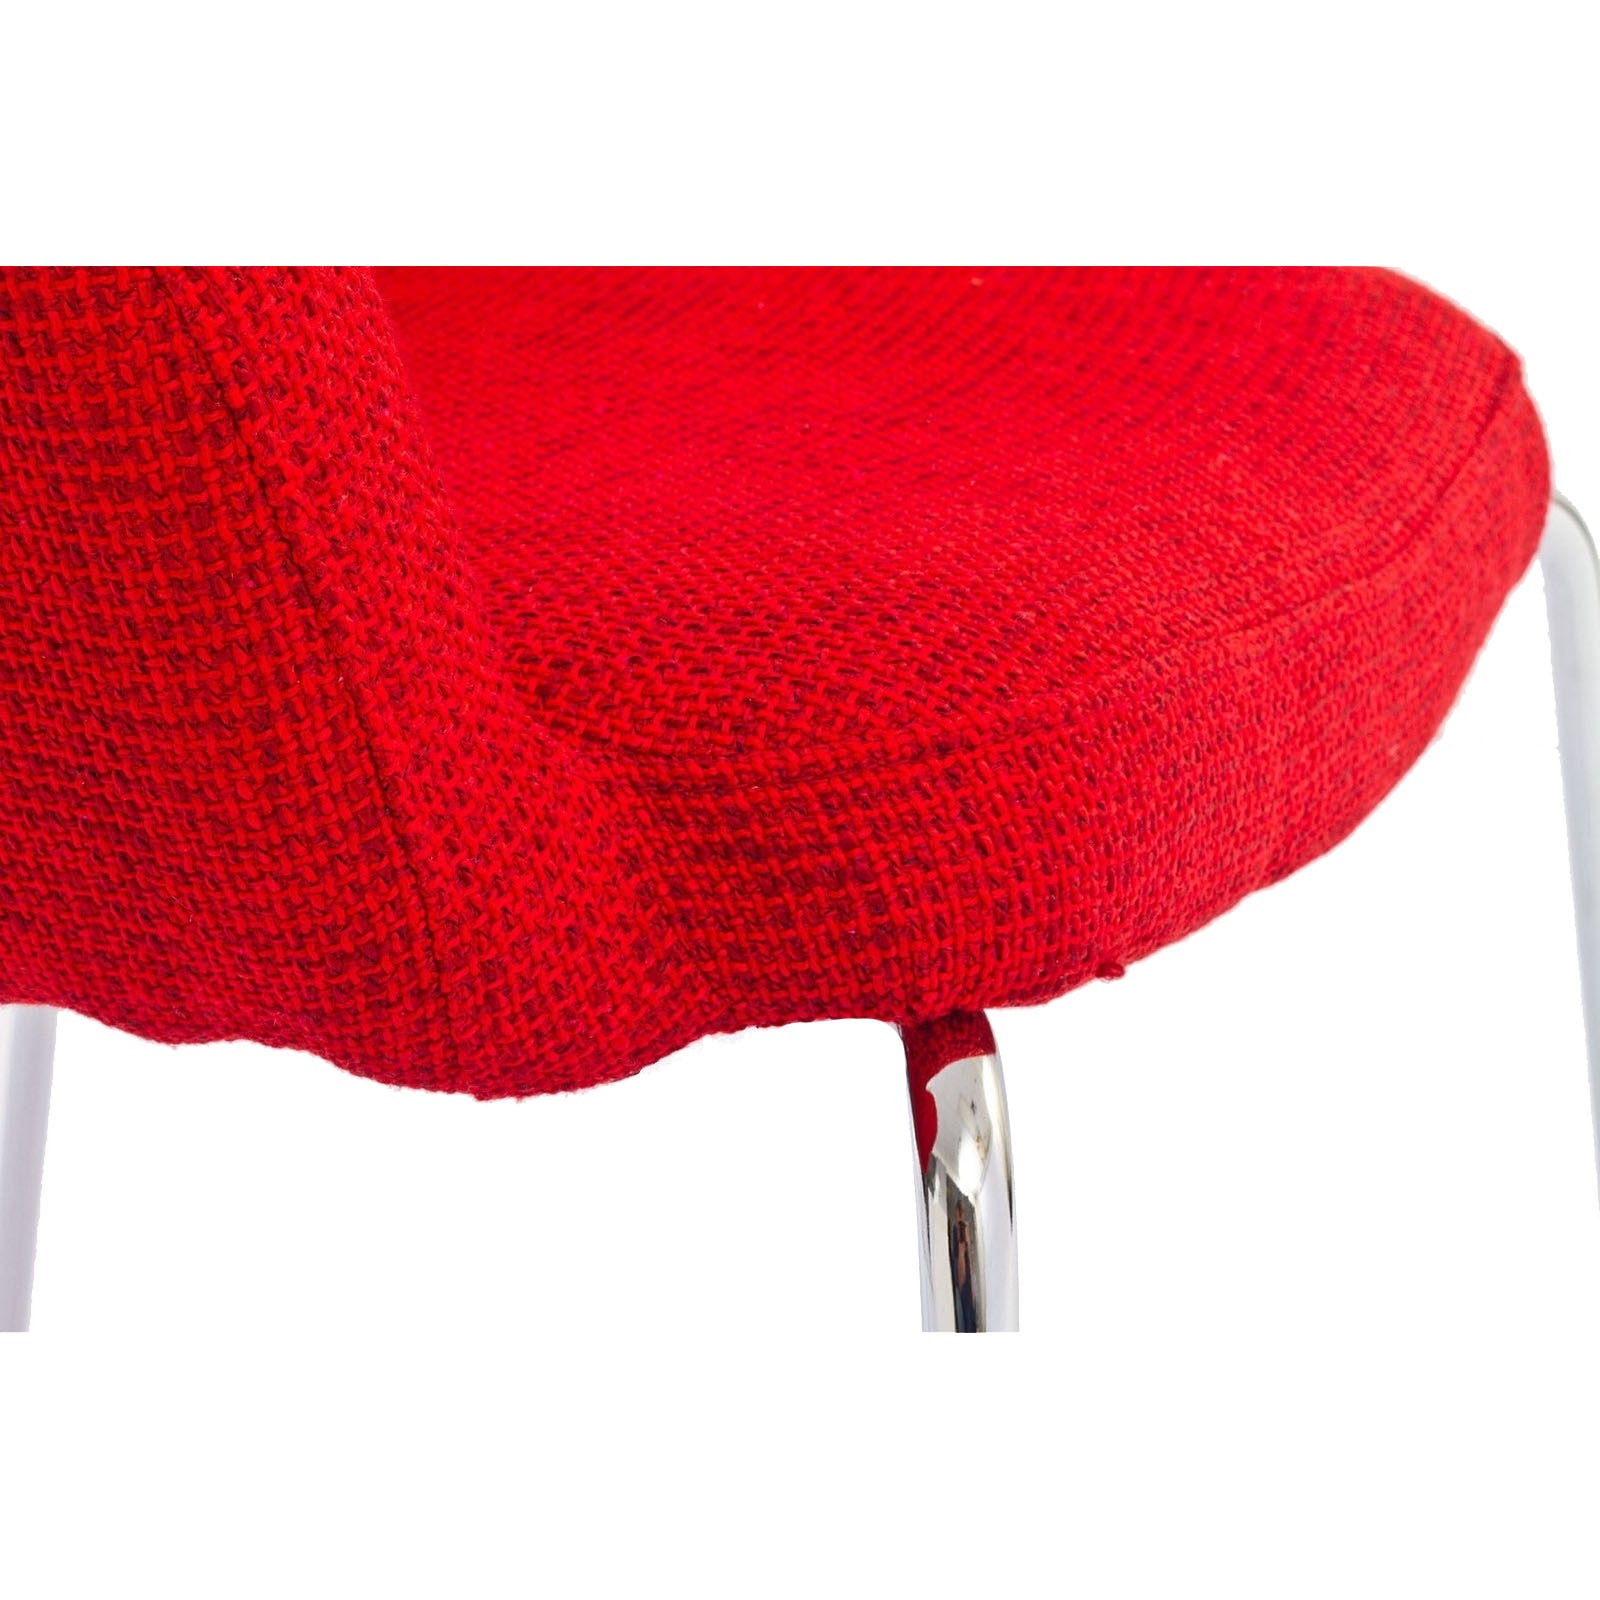 Corsica Armchair Red